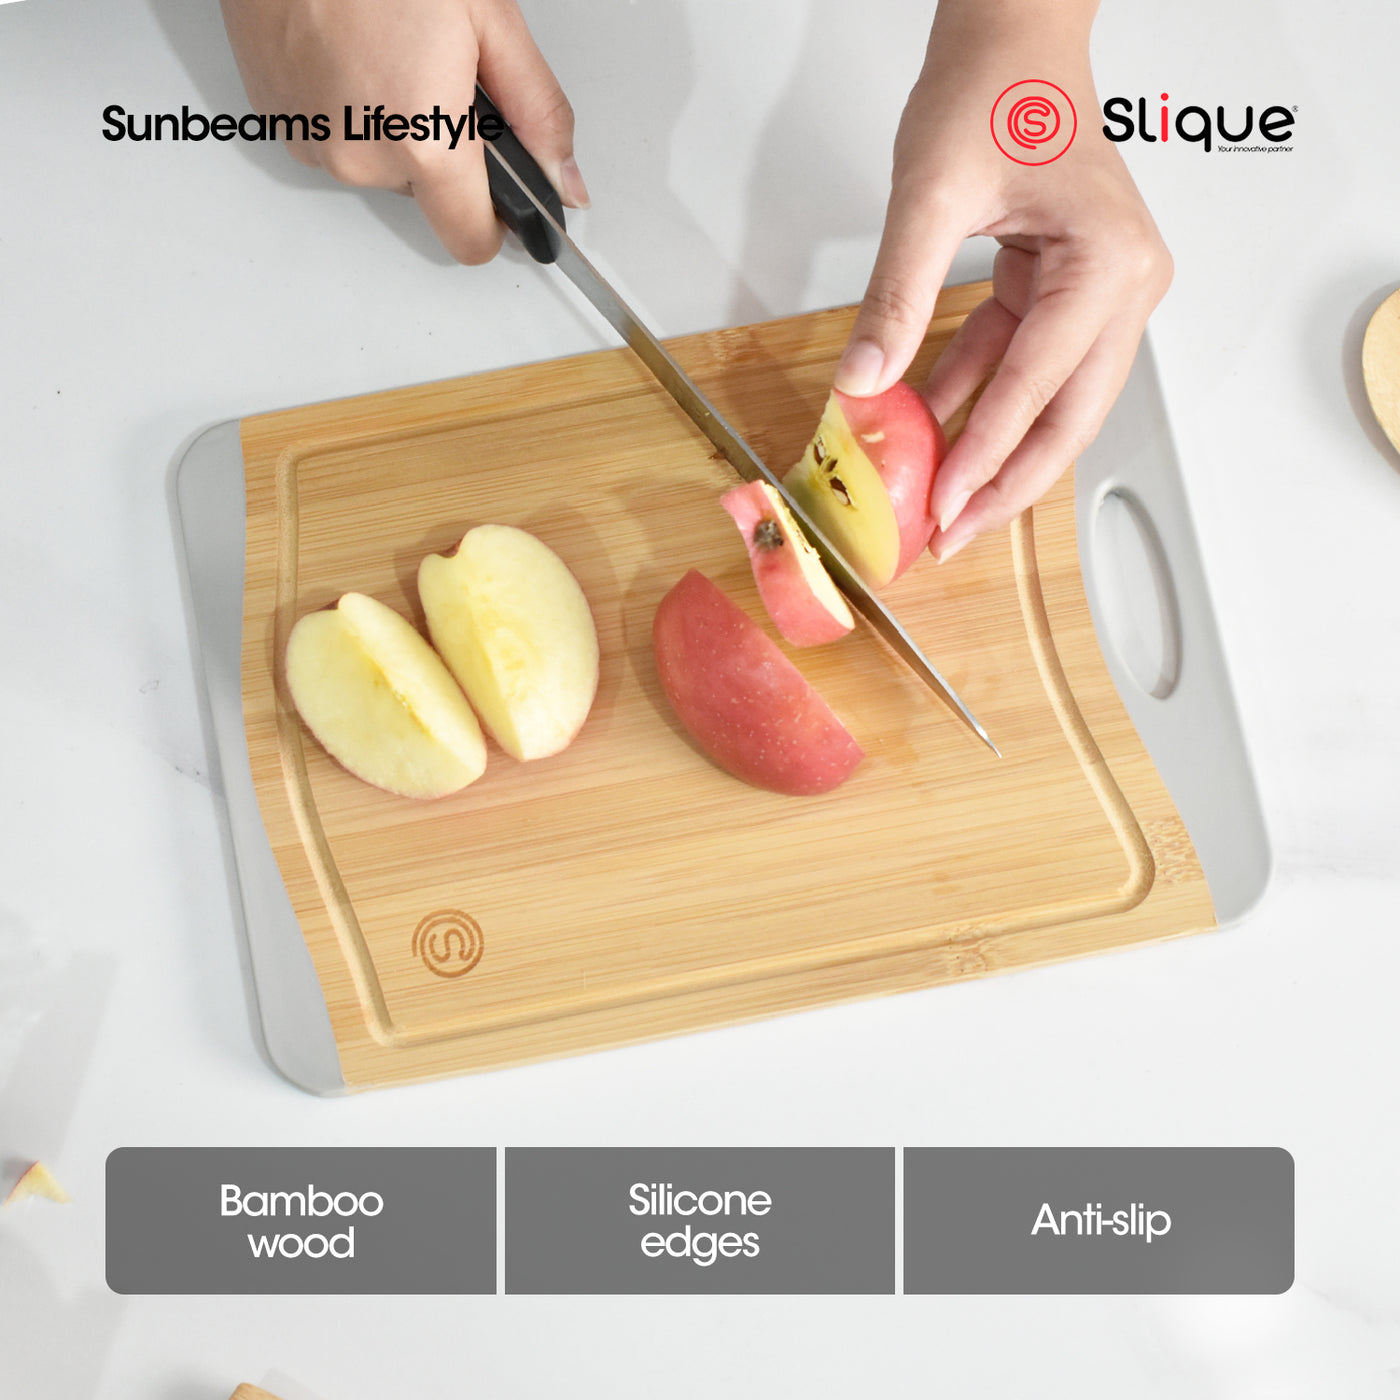 SLIQUE Wooden Cutting Board Gray | Bamboo